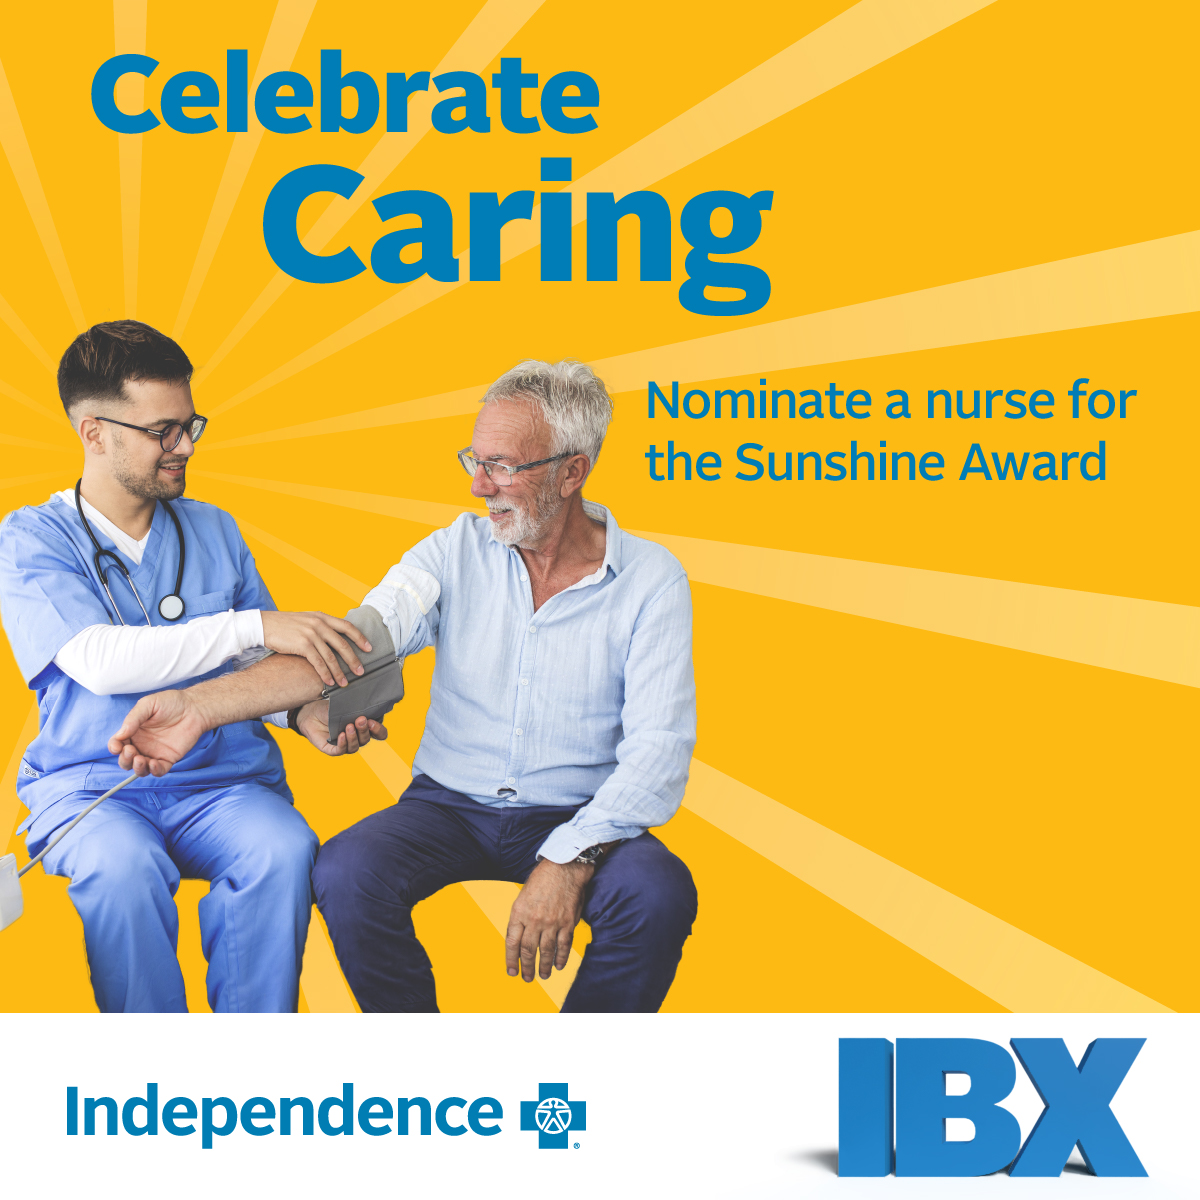 Celebrate Caring is back for its sixth year! Help @IBX shine a light on outstanding nurses in the region by submitting a nomination at ibx.com/nurses by May 12. #CelebrateCaring